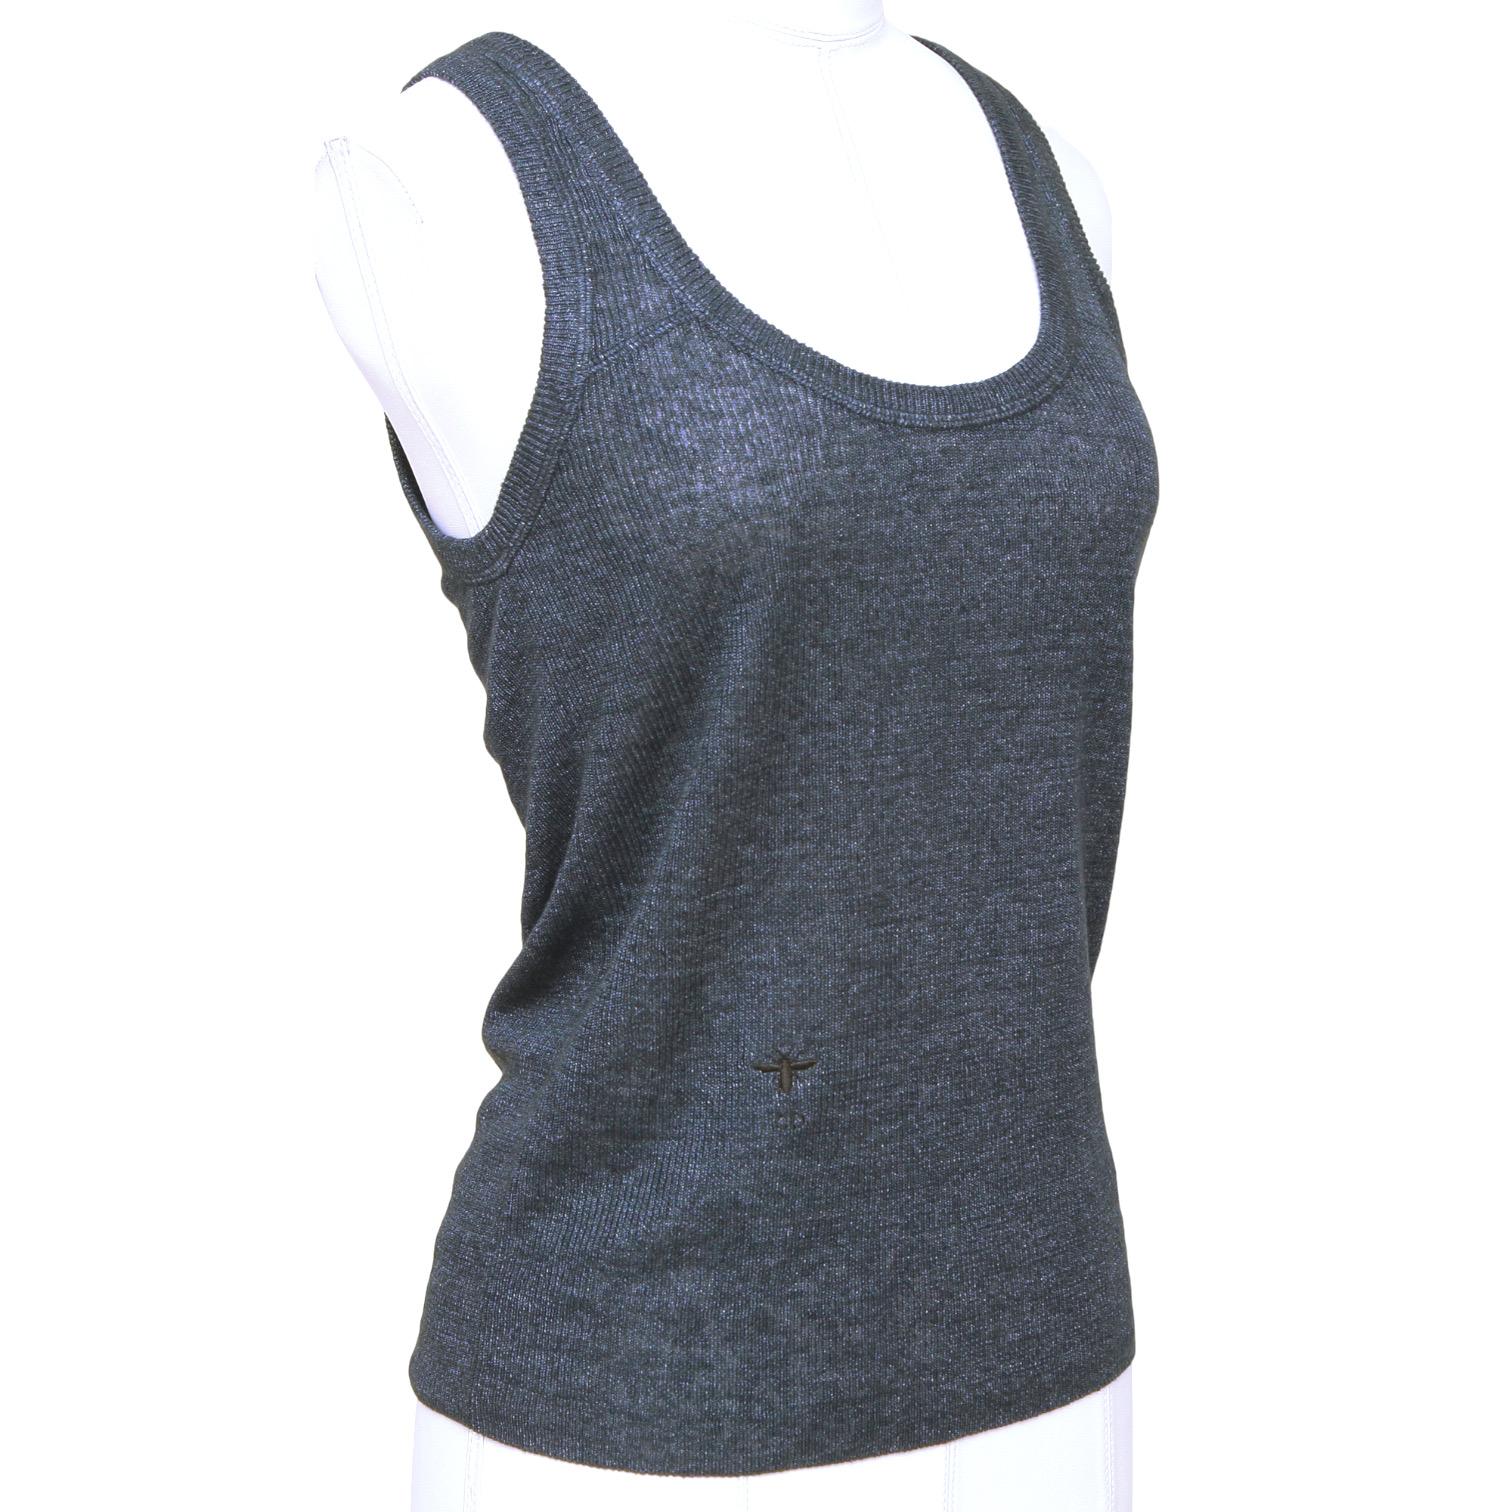 GUARANTEED AUTHENTIC CHRISTIAN DIOR NAVY SLEEVELESS KNIT TOP

Design:

- Scoop neck.
- Sleeveless.
- Slip on.

Size: 36

Material: 100% Chanvre

Measurements (Approximate laid flat, material has a good amount of give):
- Underarm to Underarm: 14